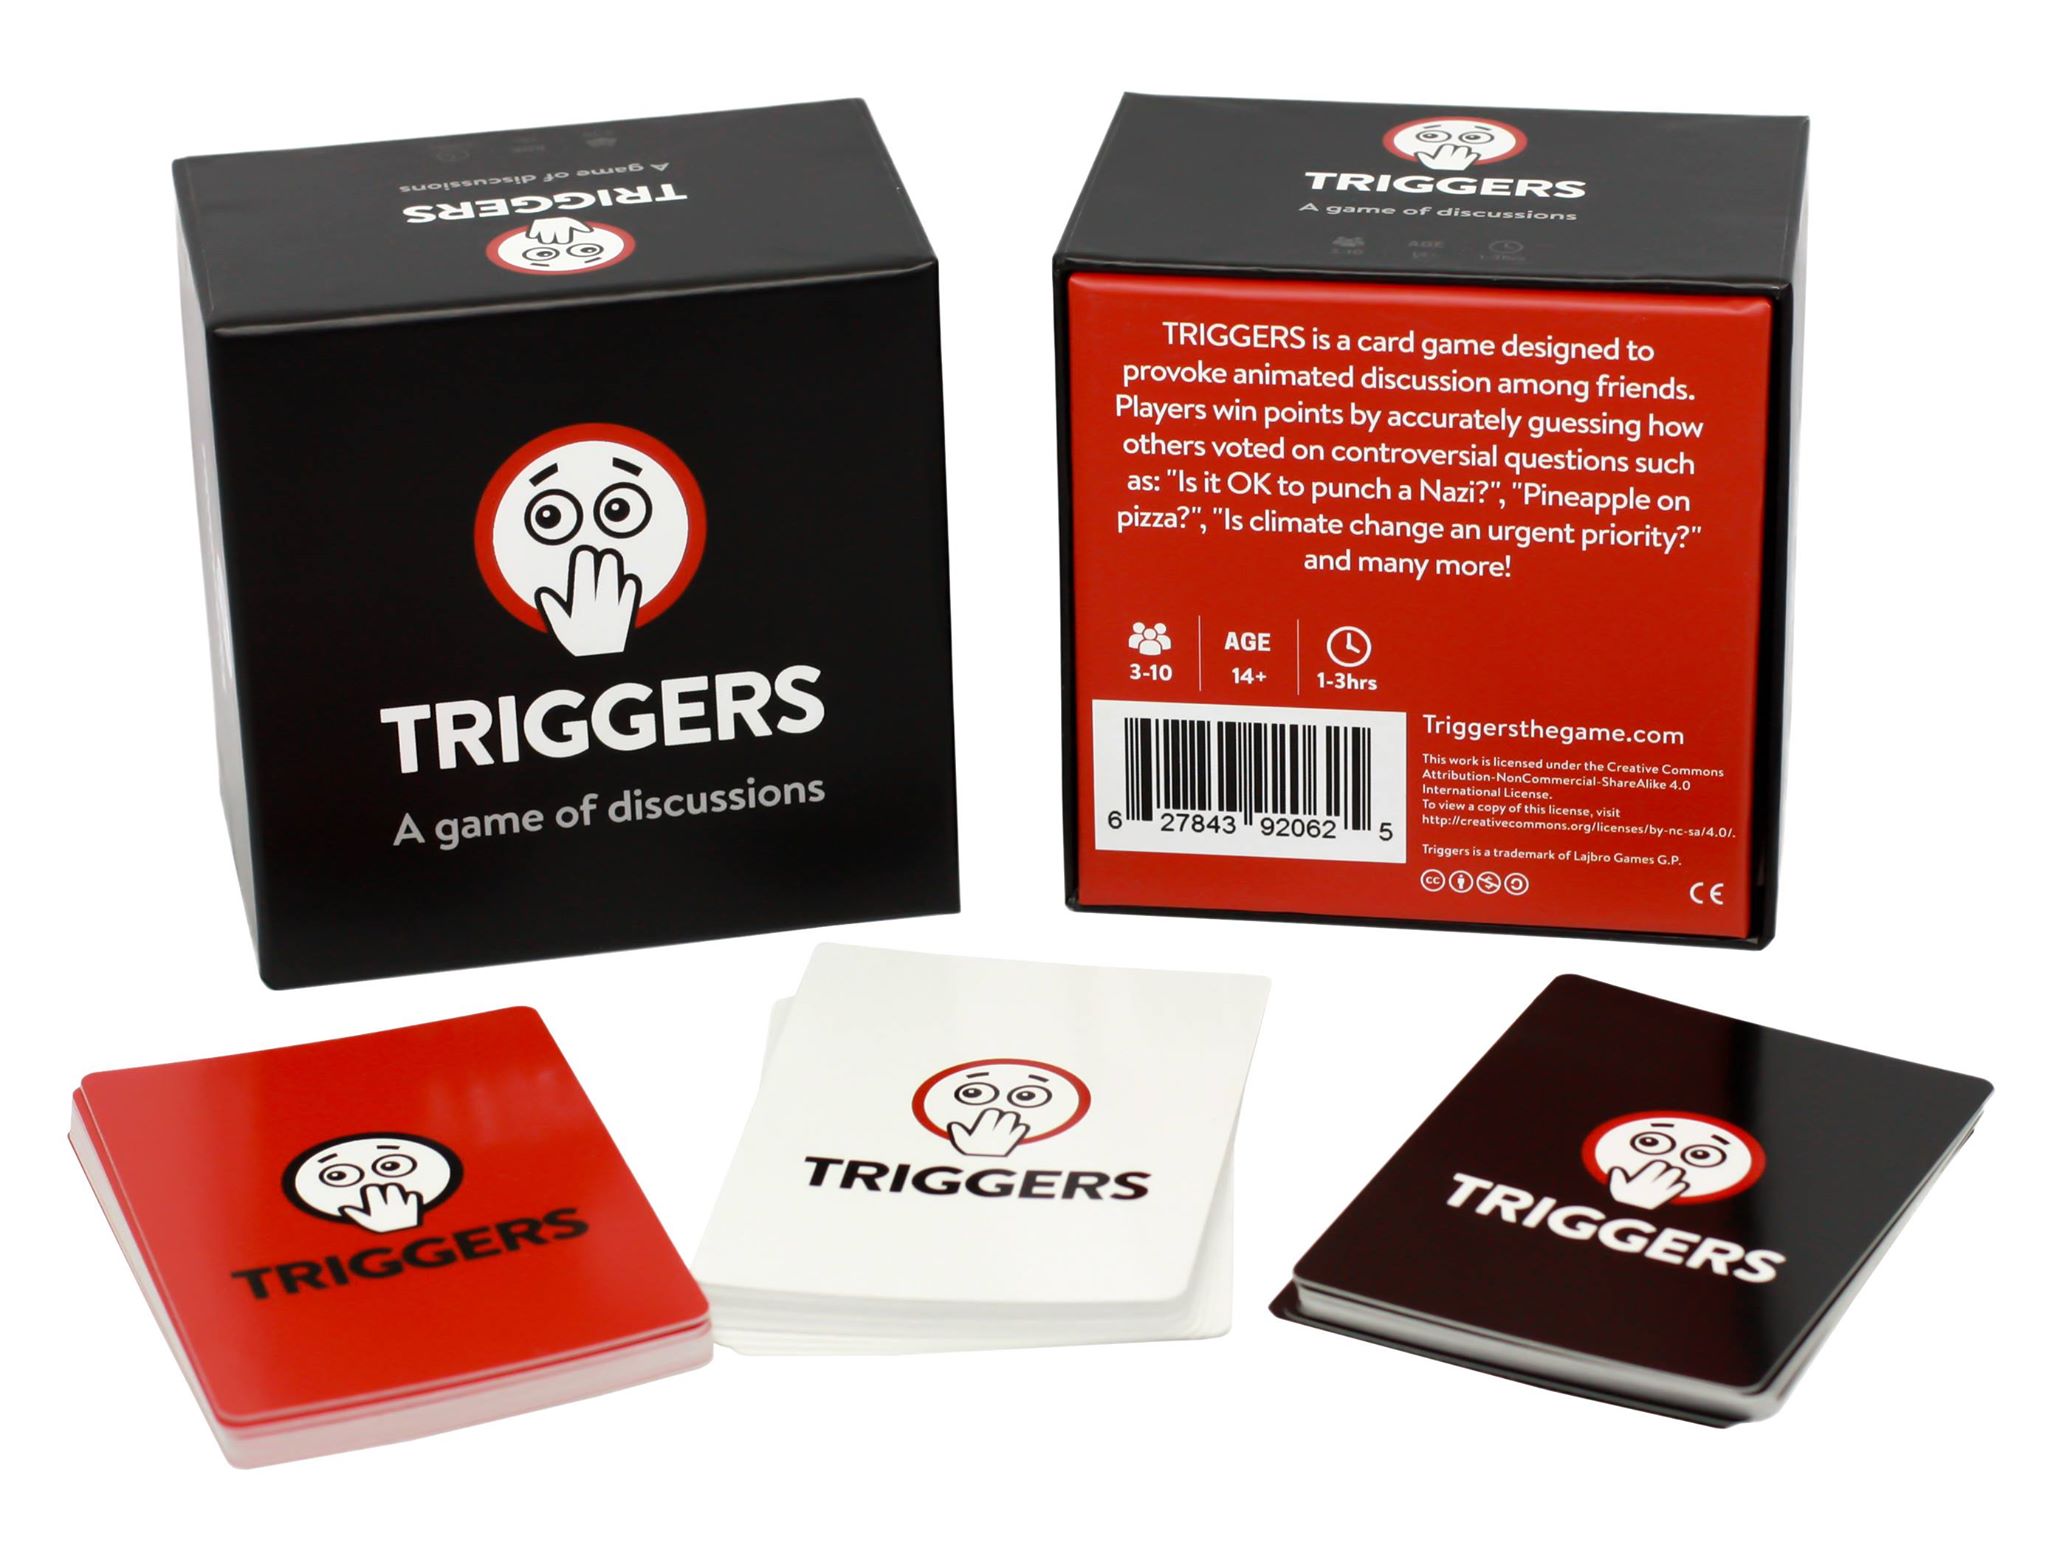 TRIGGERS: A game of discussions